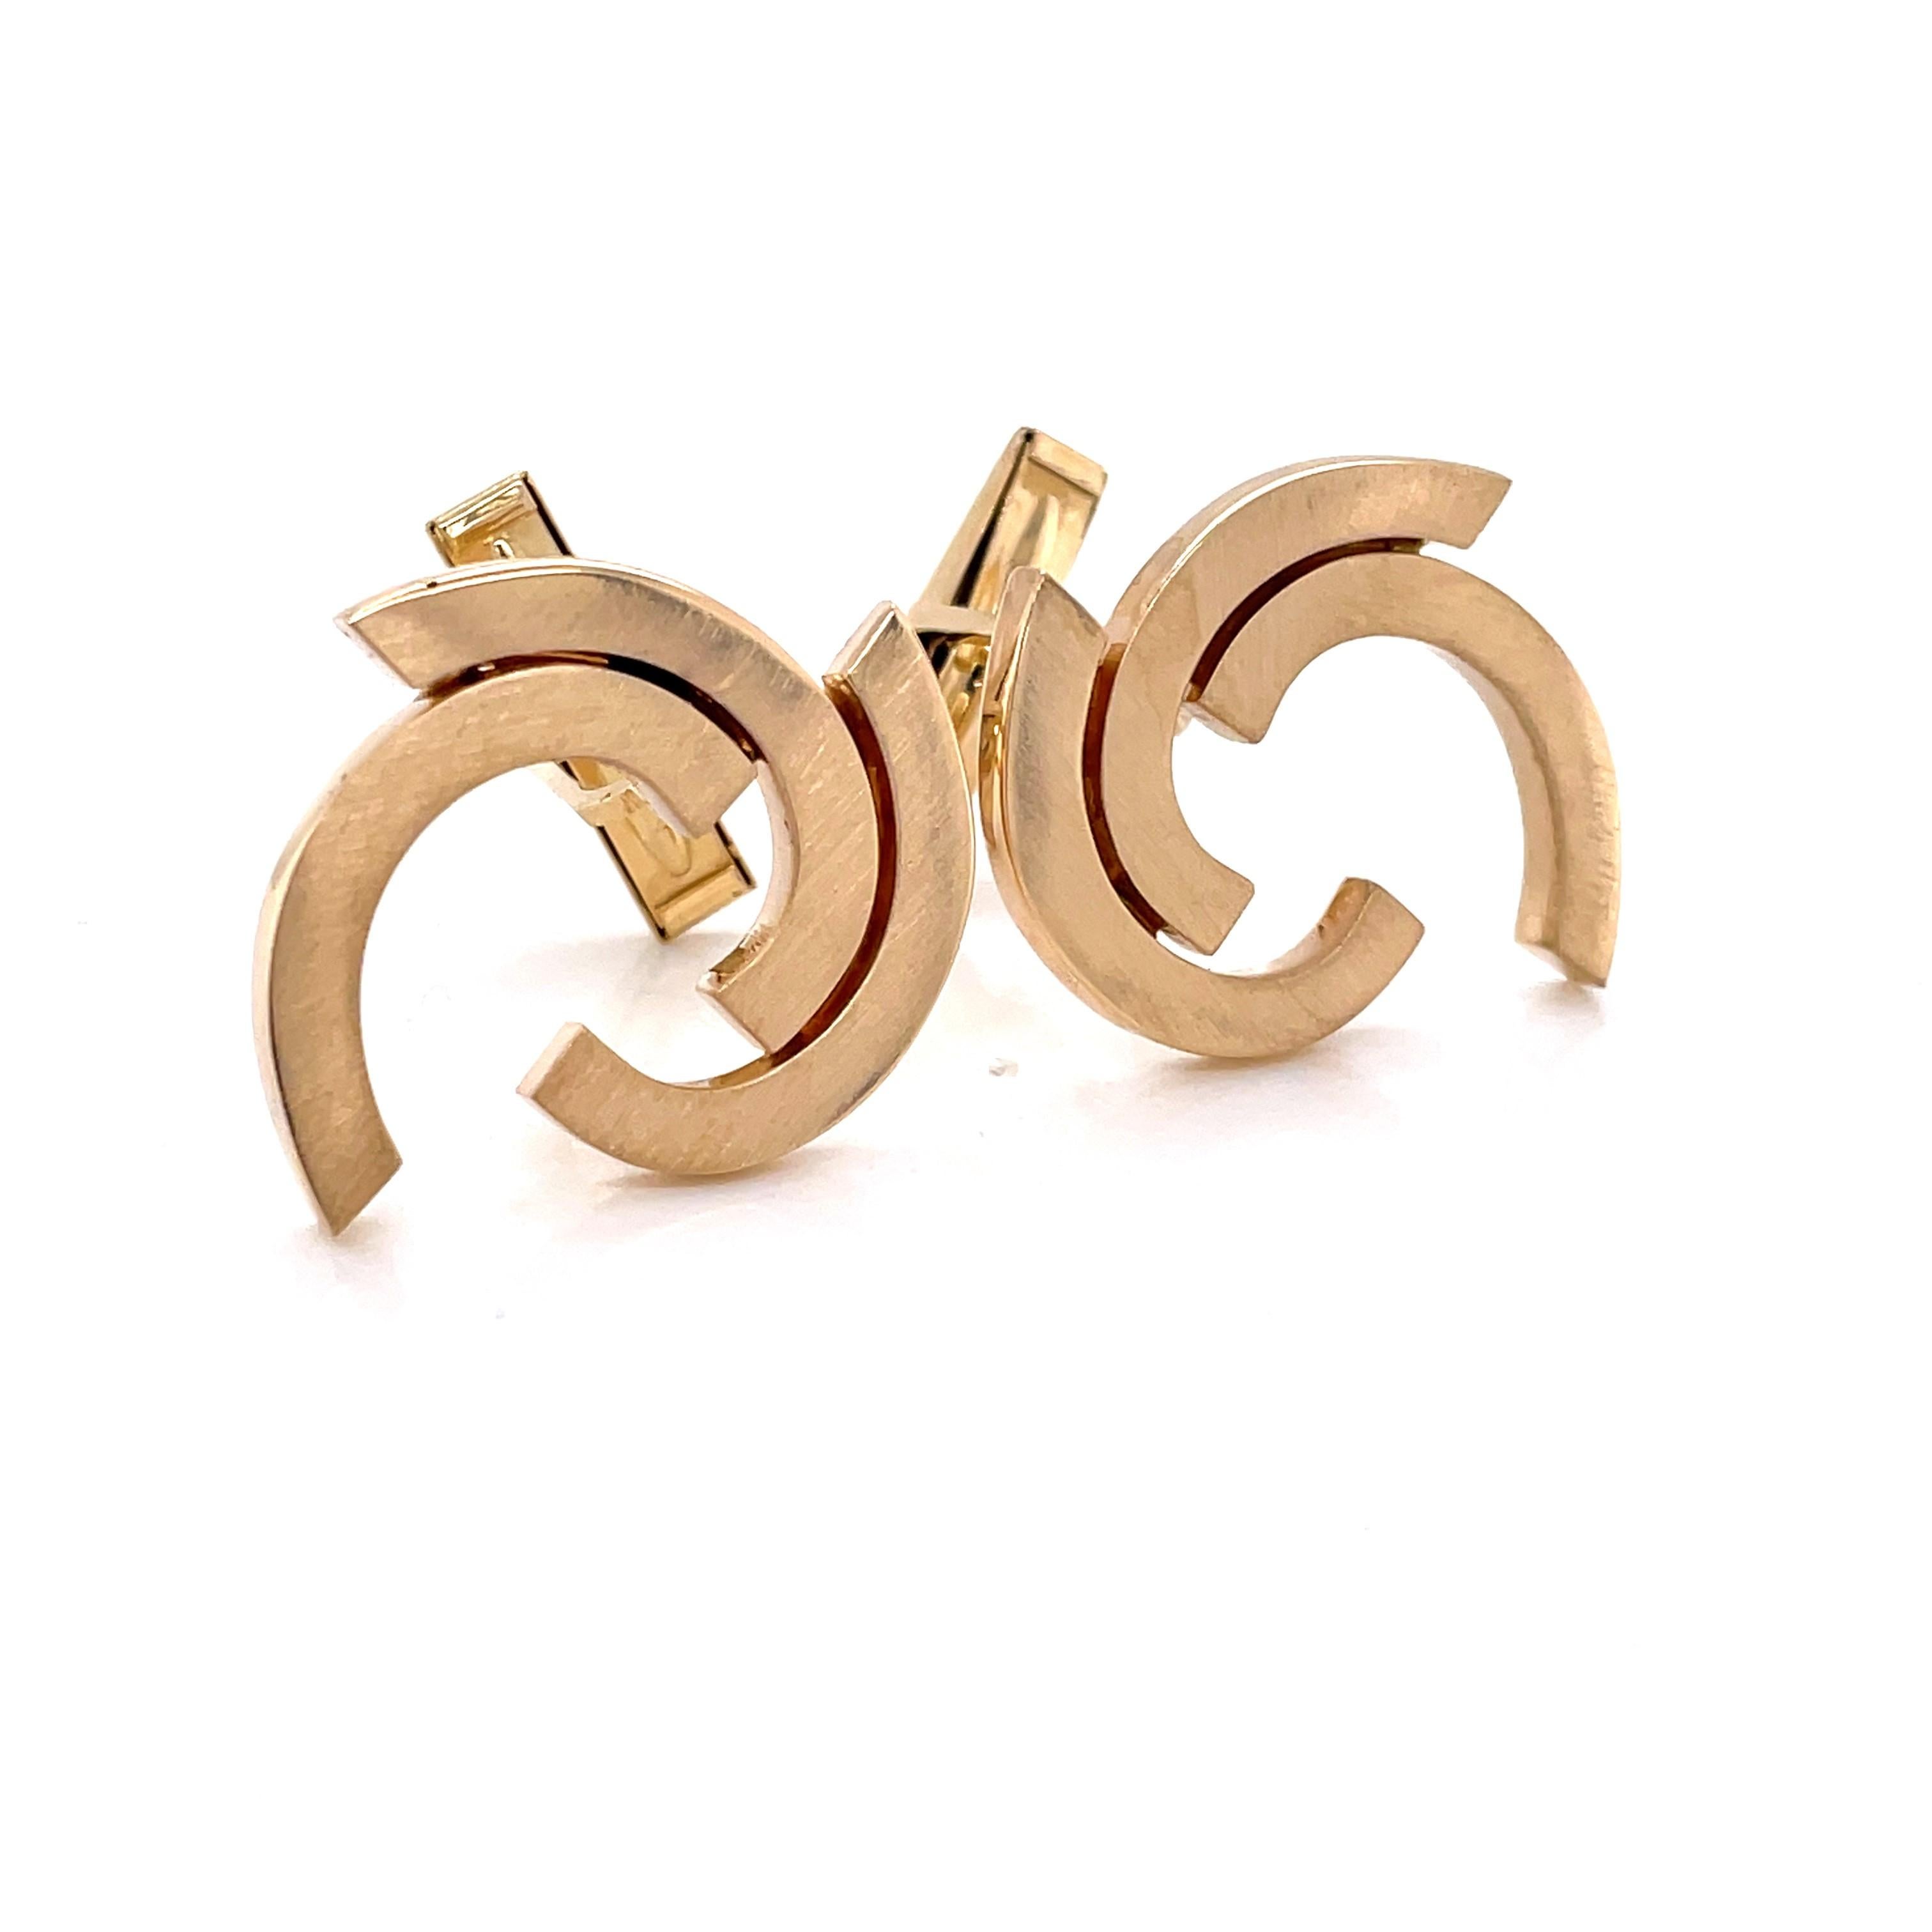 Satin Swirls of Gold Cuff Links  In Good Condition For Sale In Mount Kisco, NY